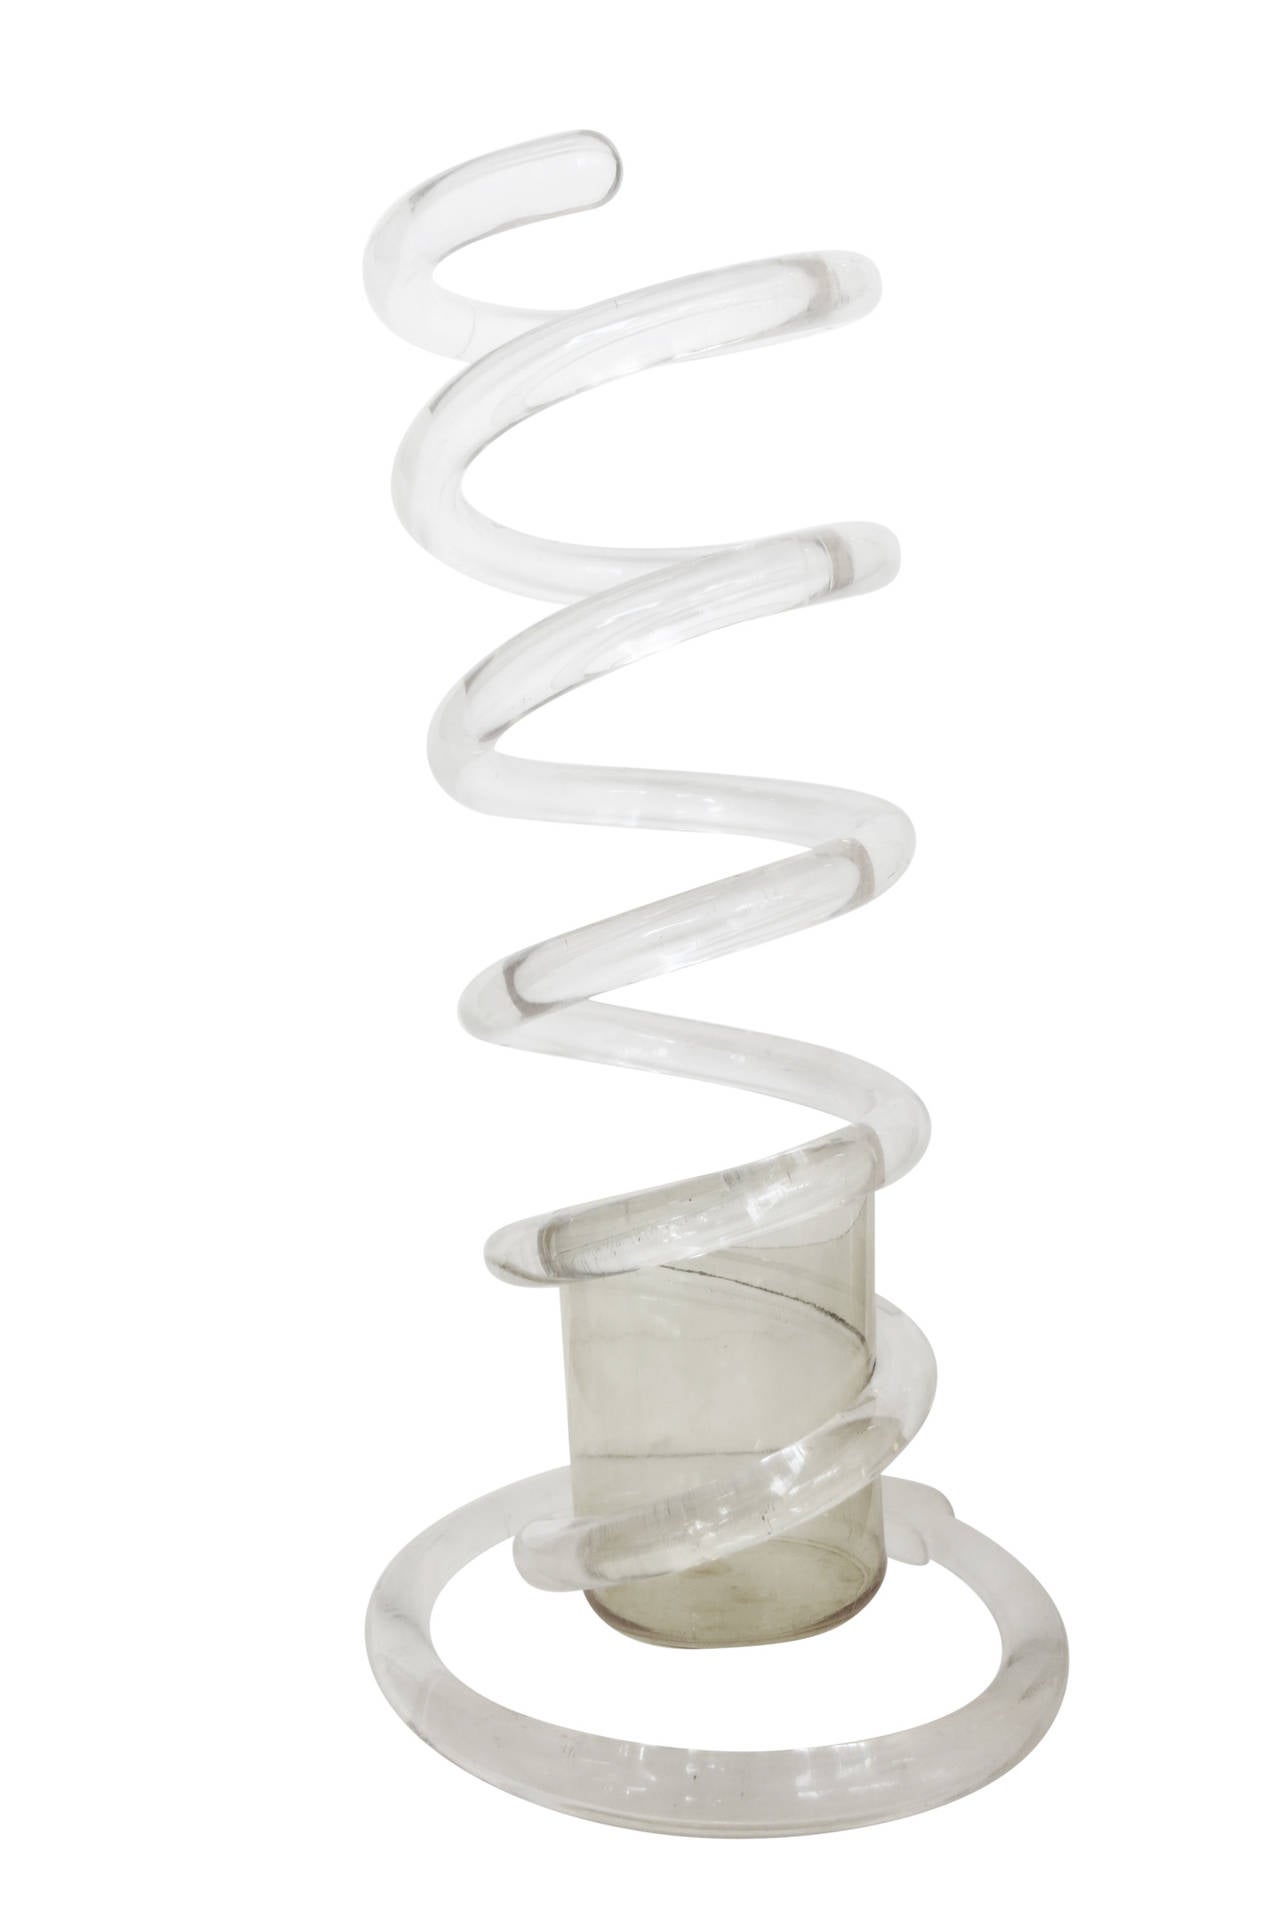 Dorothy Thorpe Spiral Spring umbrella Lucite stand. This piece of early Lucite sculptural art features a piece of Lucite spun into a spring shape with a small umbrella holder along the bottom.

All the qualities that made Lucite a beguiling